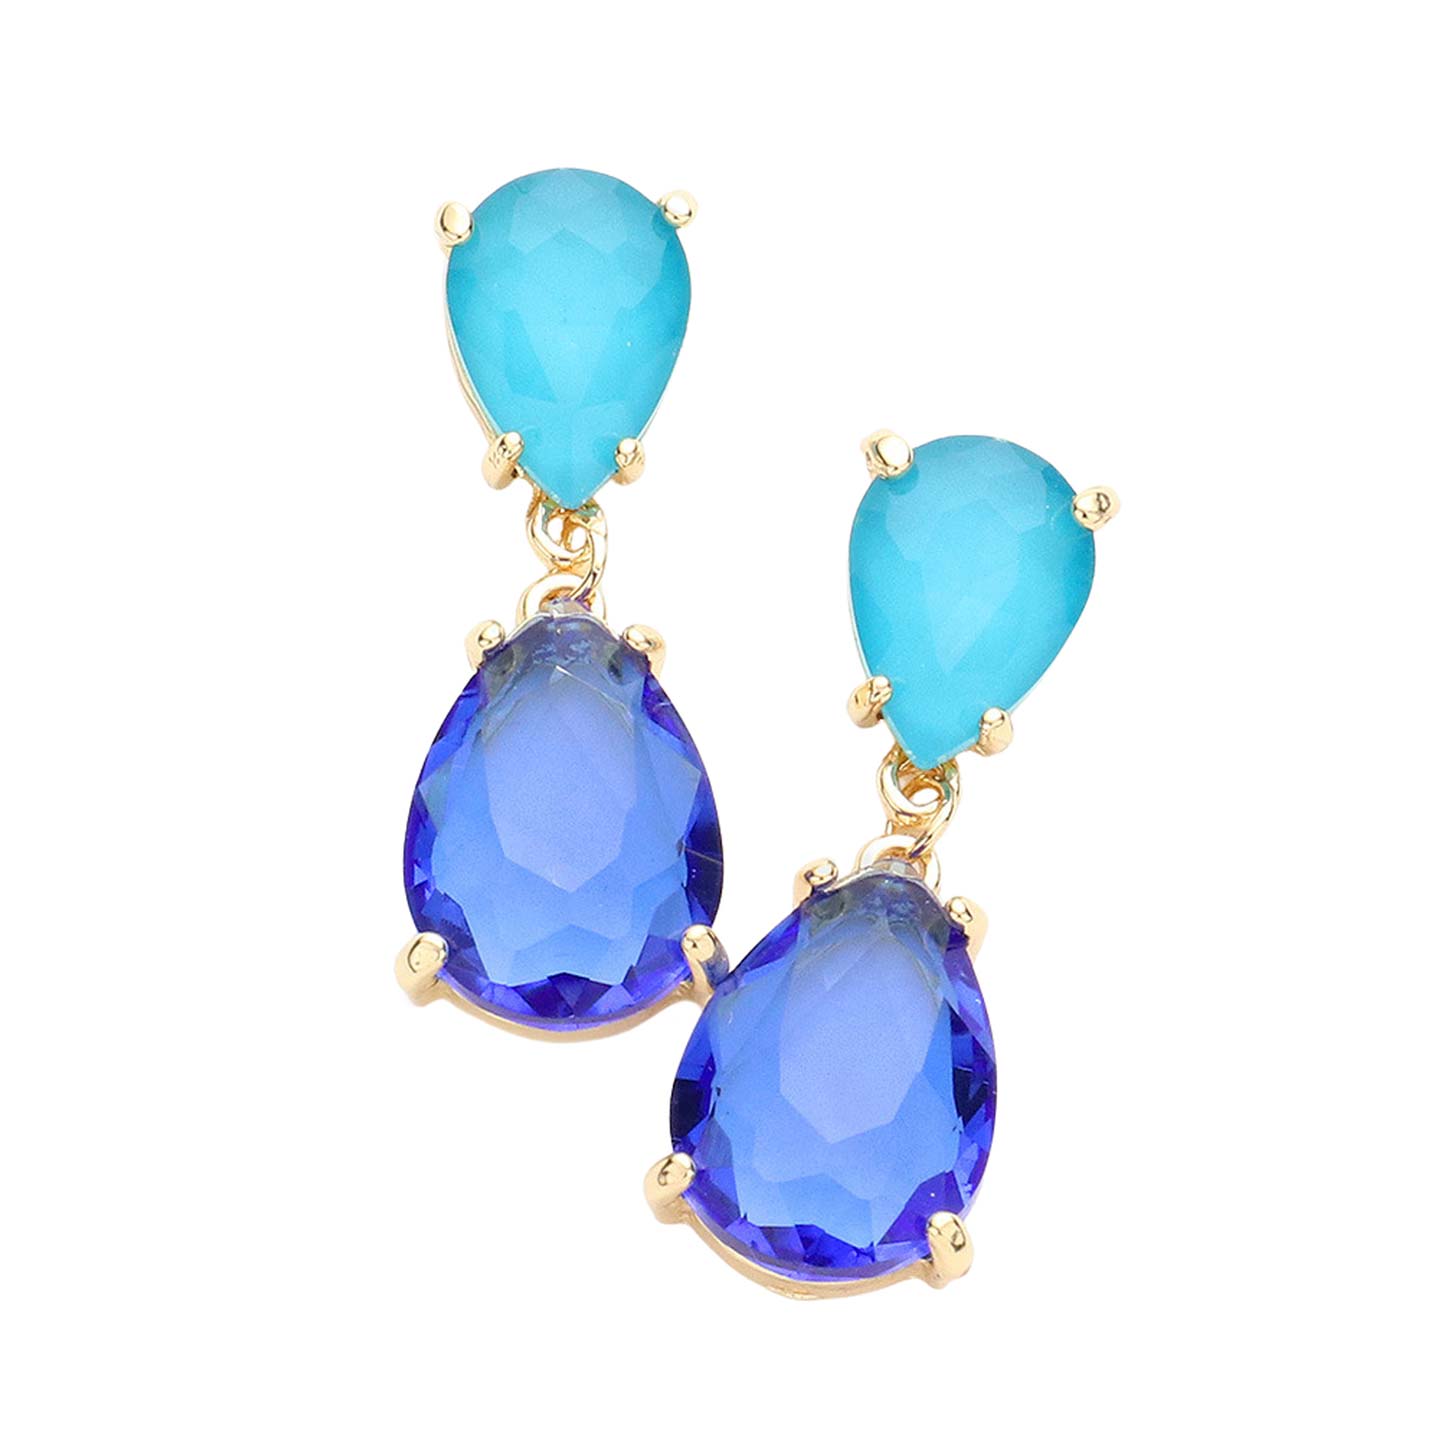 Sapphire Double Teardrop Link Dangle Evening Earrings, Beautiful teardrop-shaped dangle drop earrings. These elegant, comfortable earrings can be worn all day to dress up any outfit. Wear a pop of shine to complete your ensemble with a classy style. The perfect accessory for adding just the right amount of shimmer and a touch of class to special events. Jewelry that fits your lifestyle and makes your moments awesome!